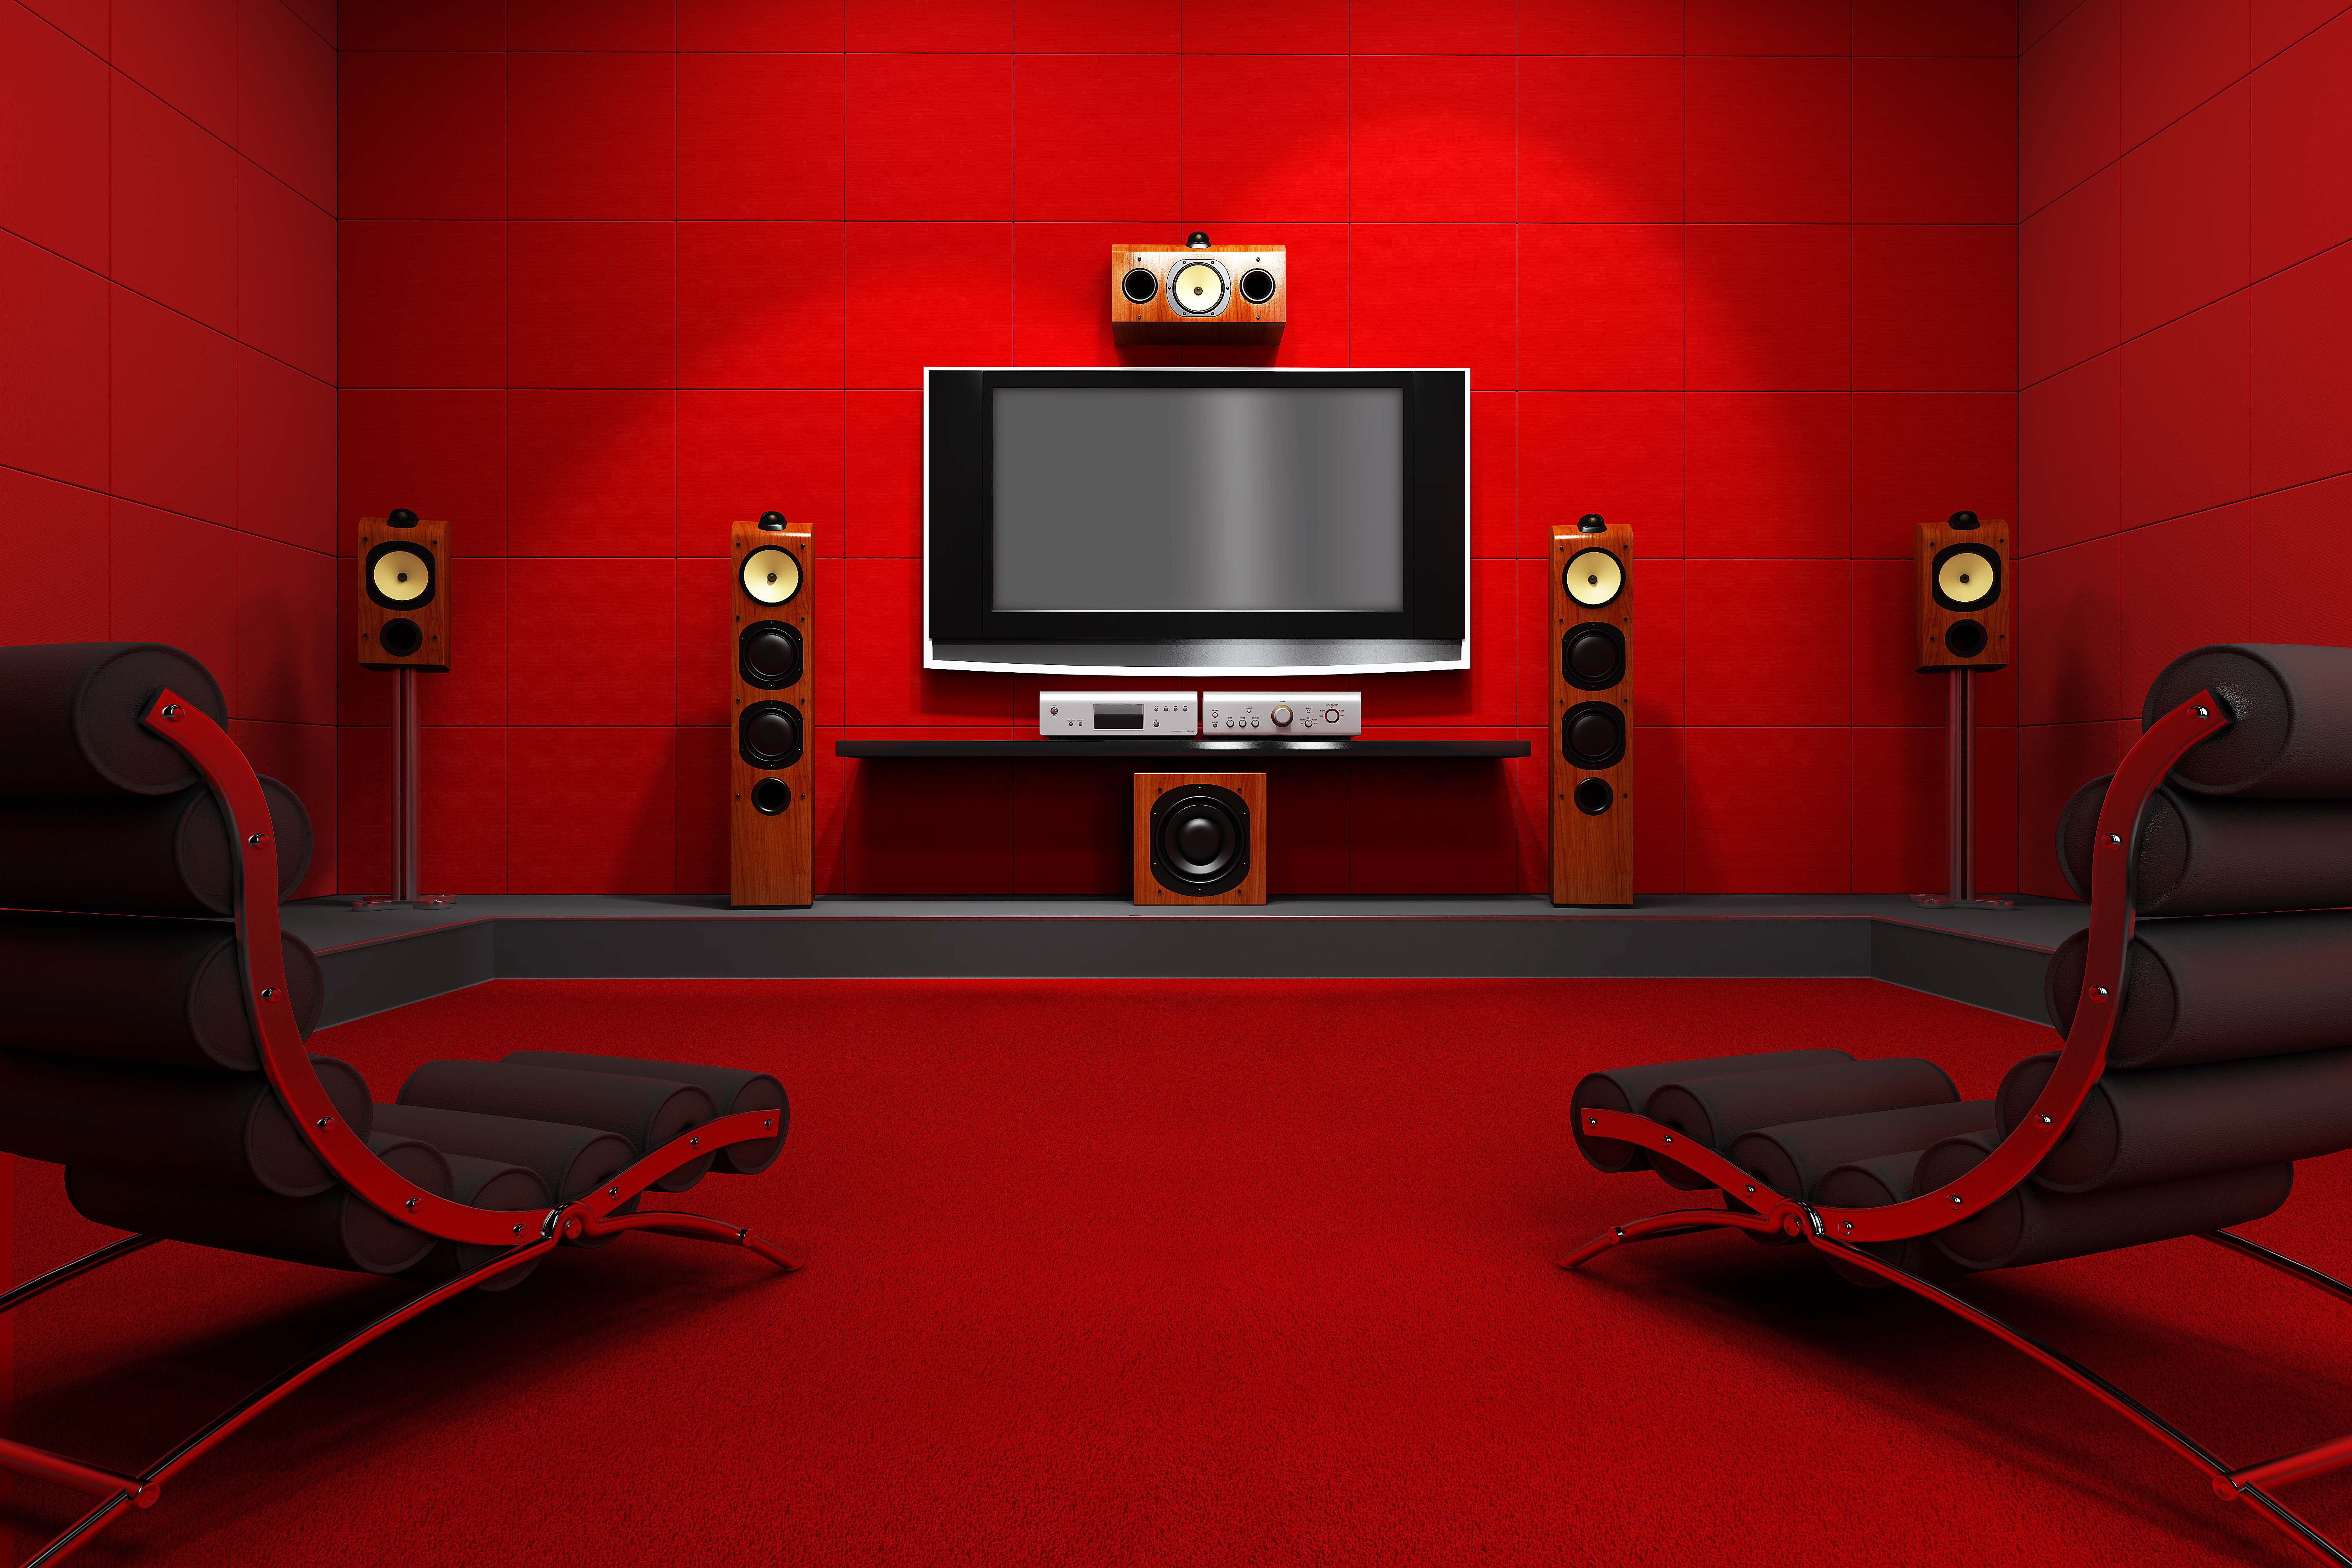 vertical wallpaper red, theatre, man made, room, chair, home theatre, speakers